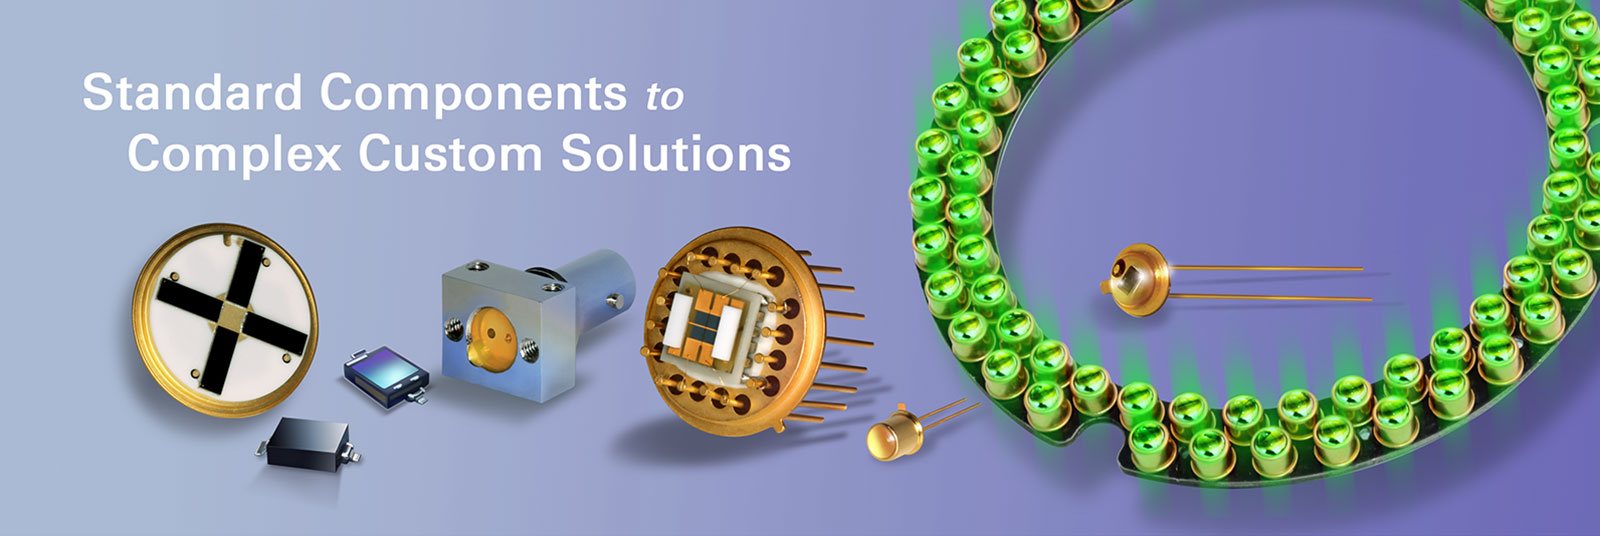 Standard components to complex custom solutions.